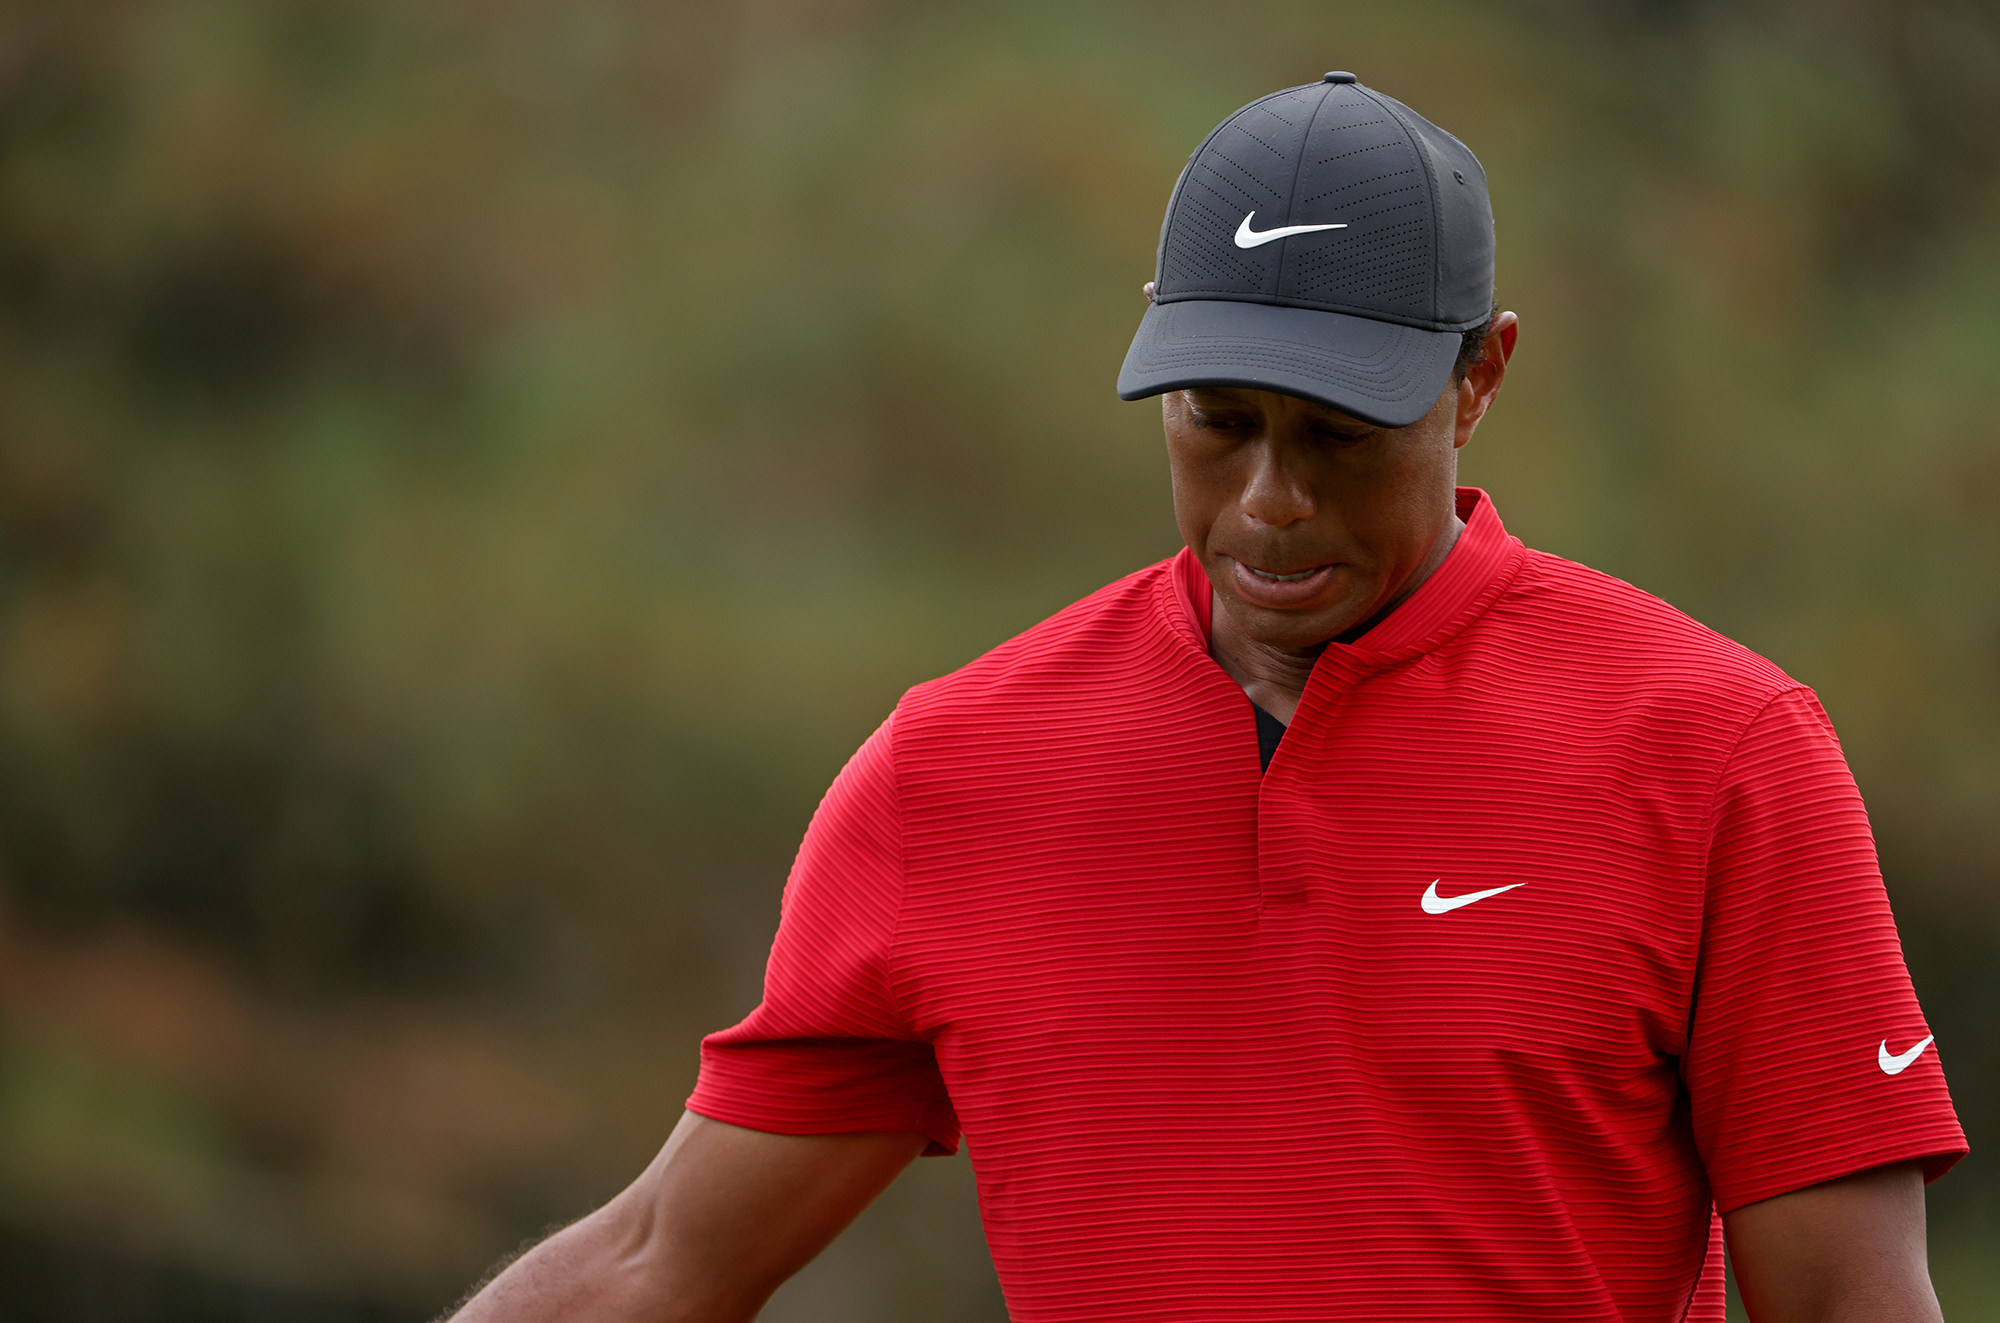 Was Tiger's incredible finish after his Augusta meltdown simply because he gave up?